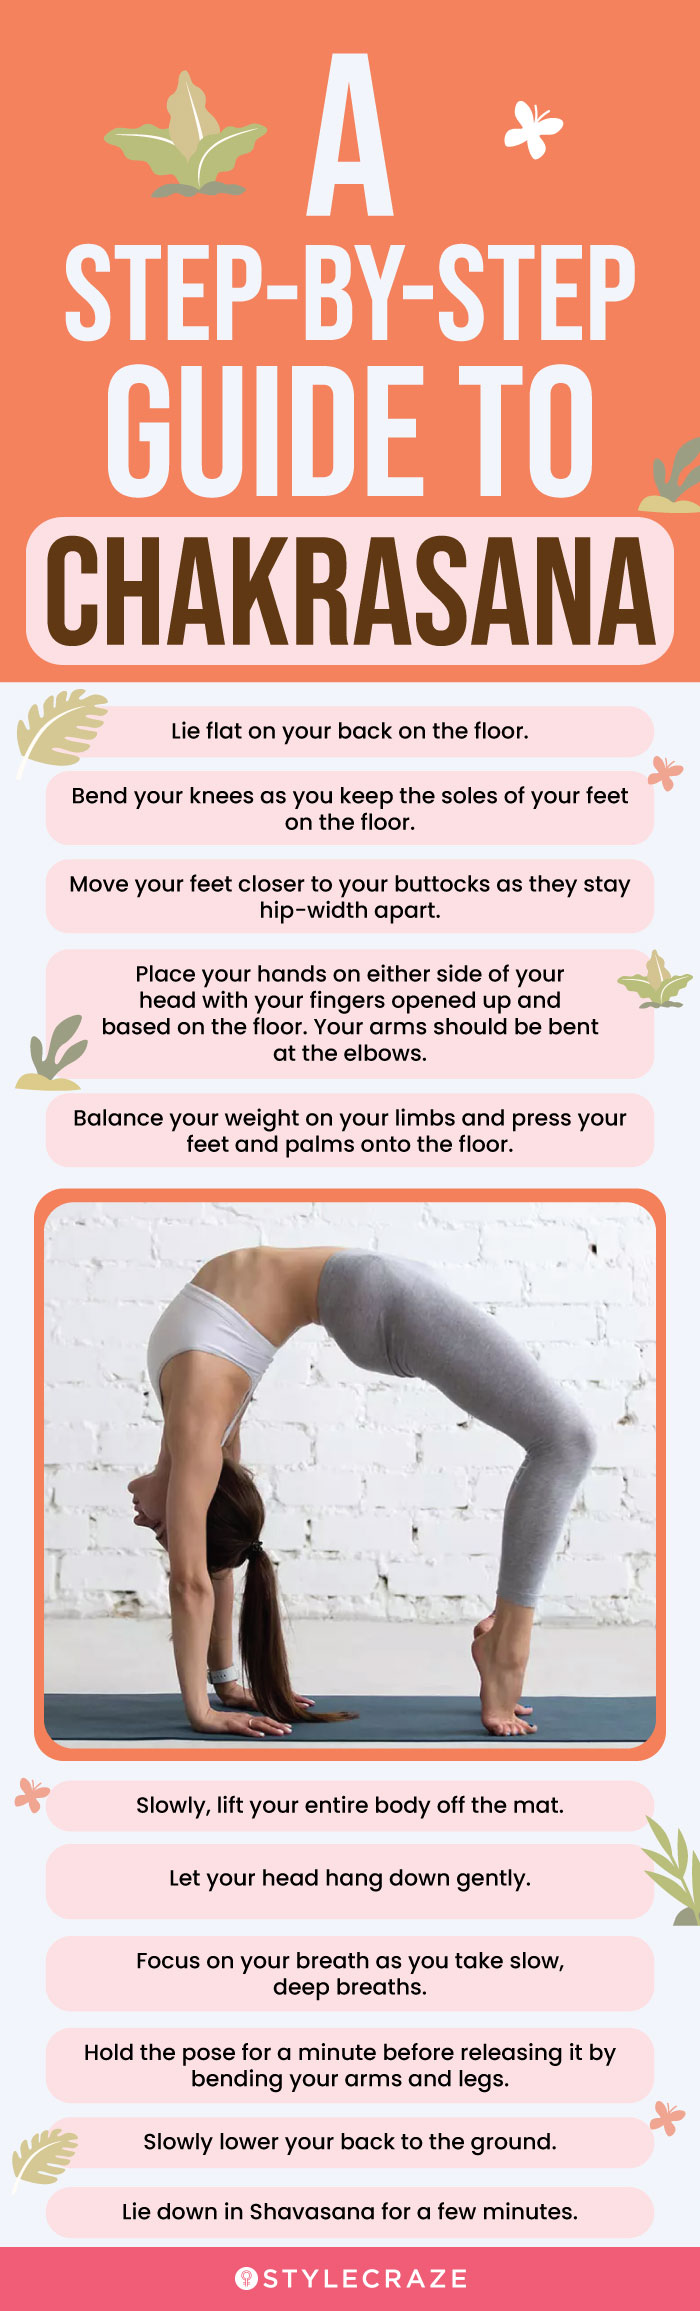 a step by step guide to chakrasana (infographic)